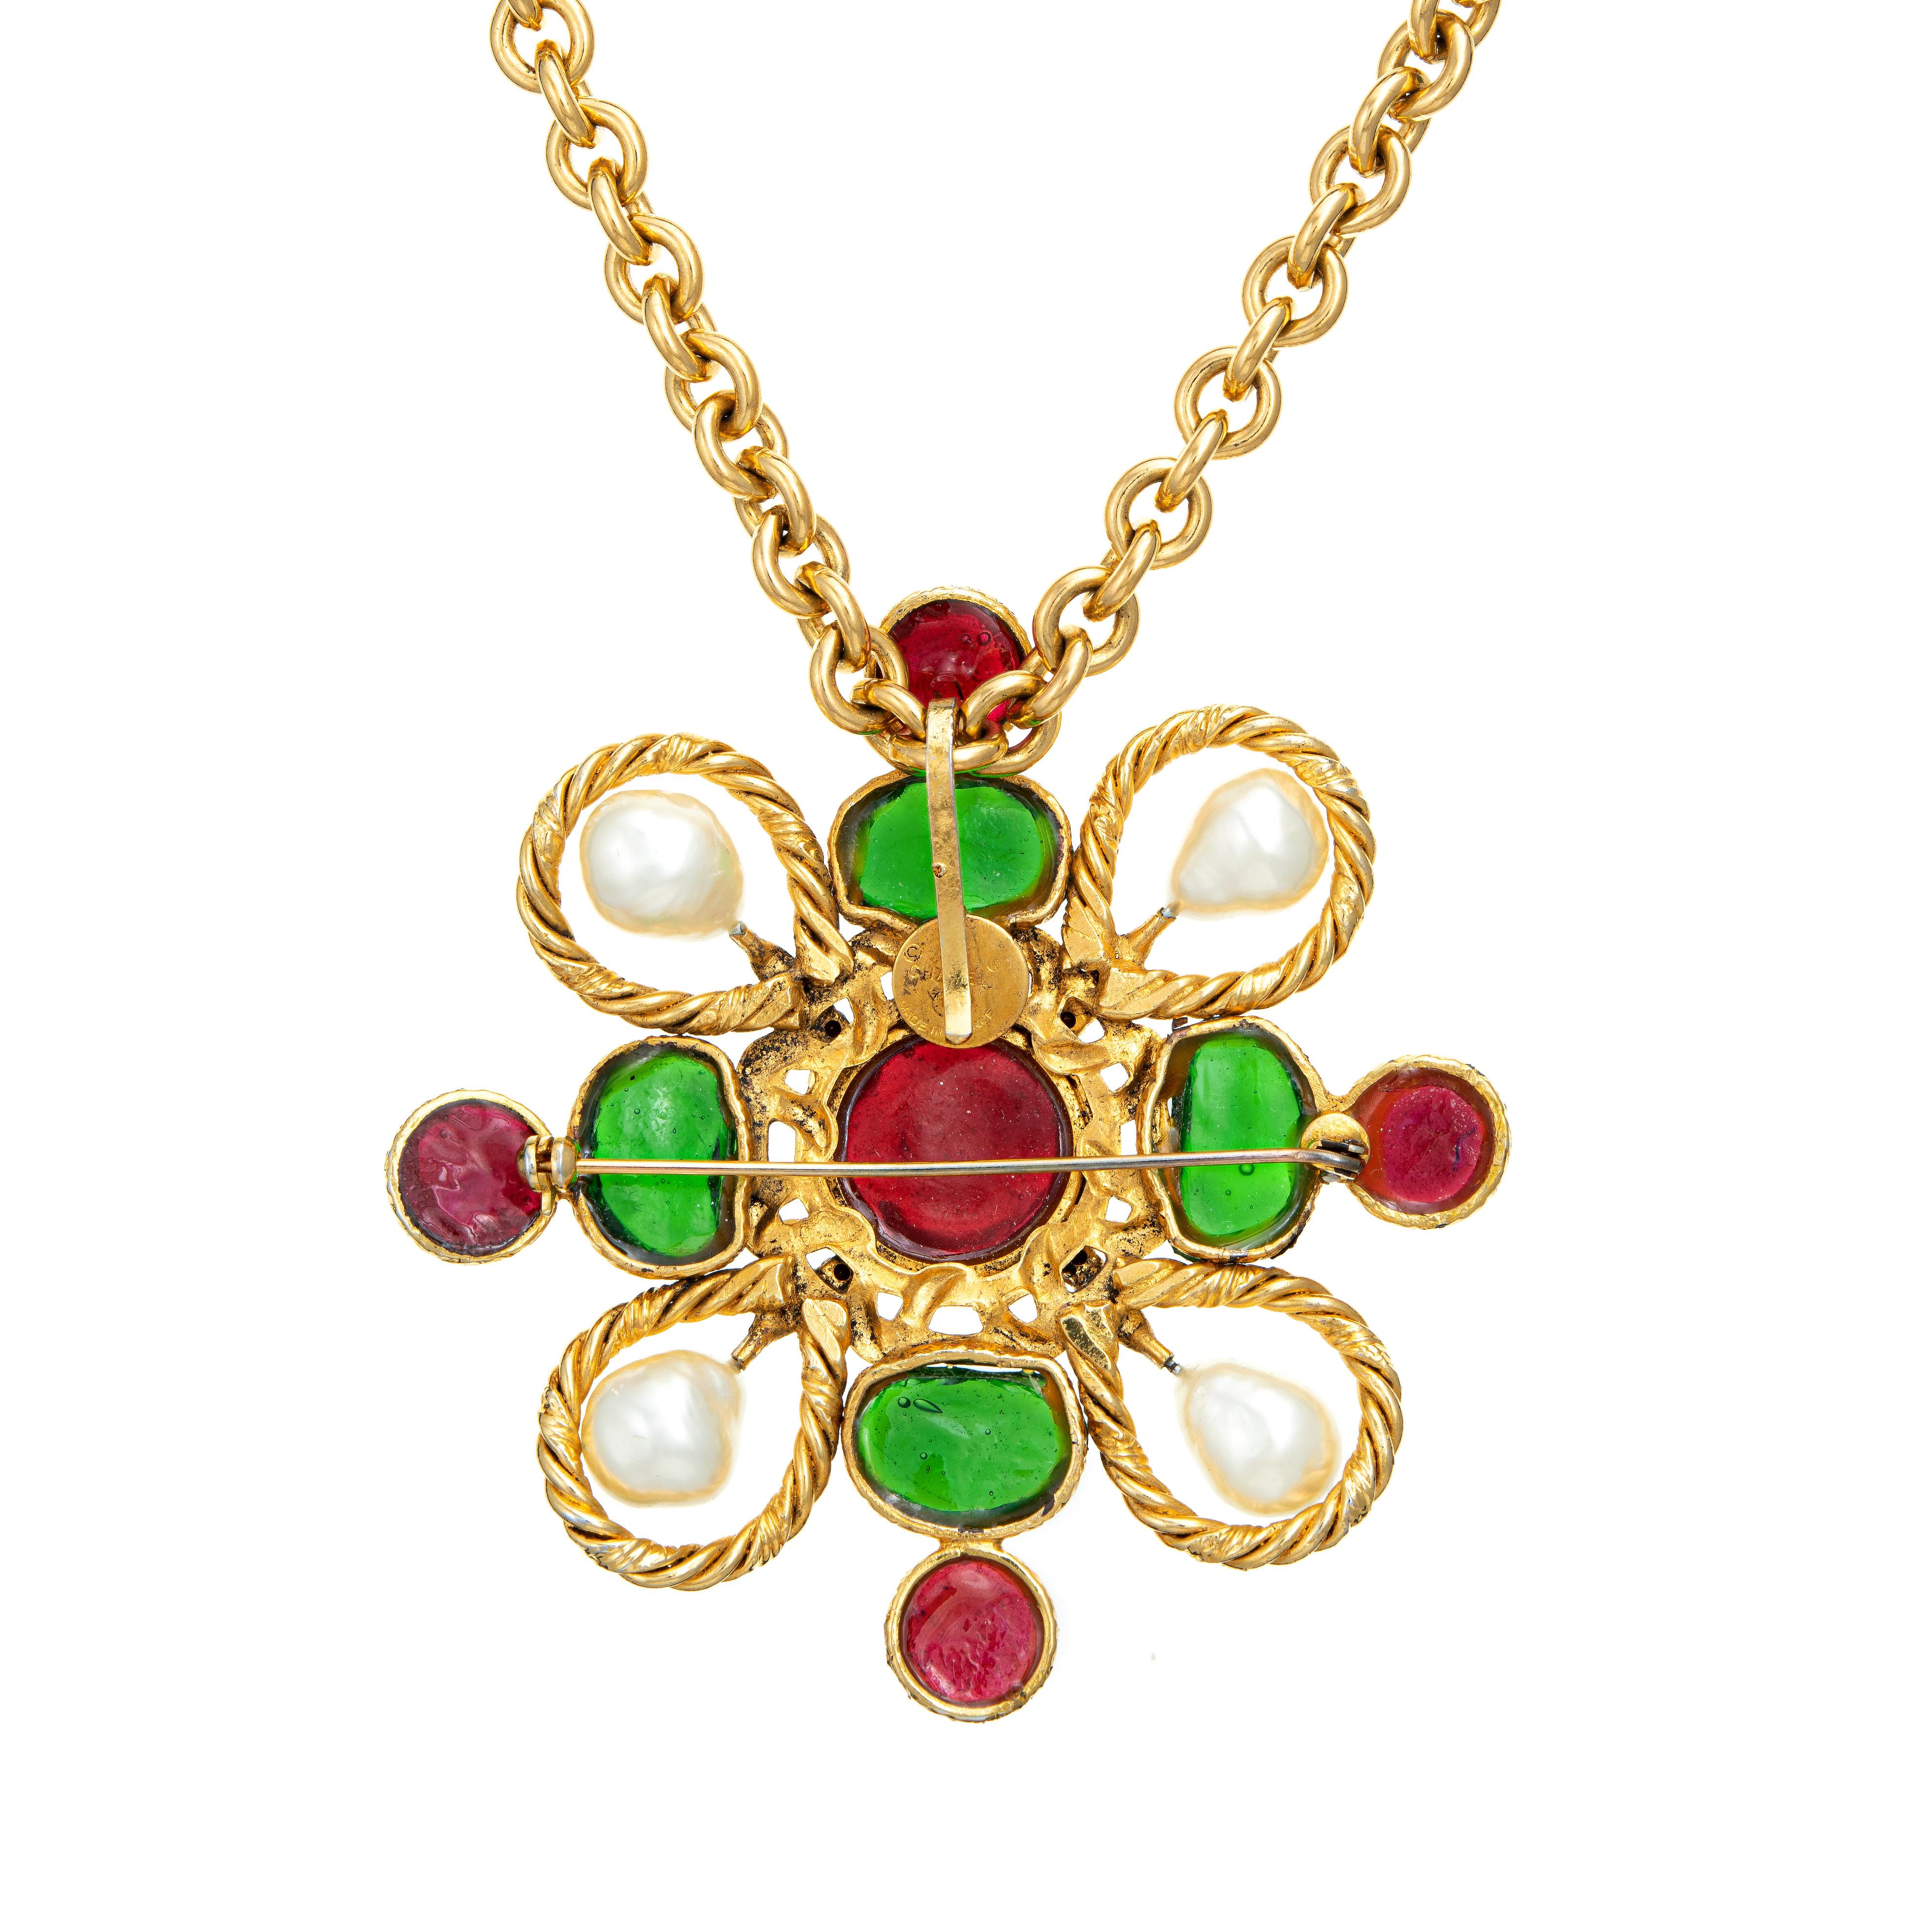 Beautiful vintage Chanel Gripoix necklace (circa 1980s) crafted in a yellow metal tone. 

Colored green and red glass, faux pearls and small crystals are set into the medallion. The long 21